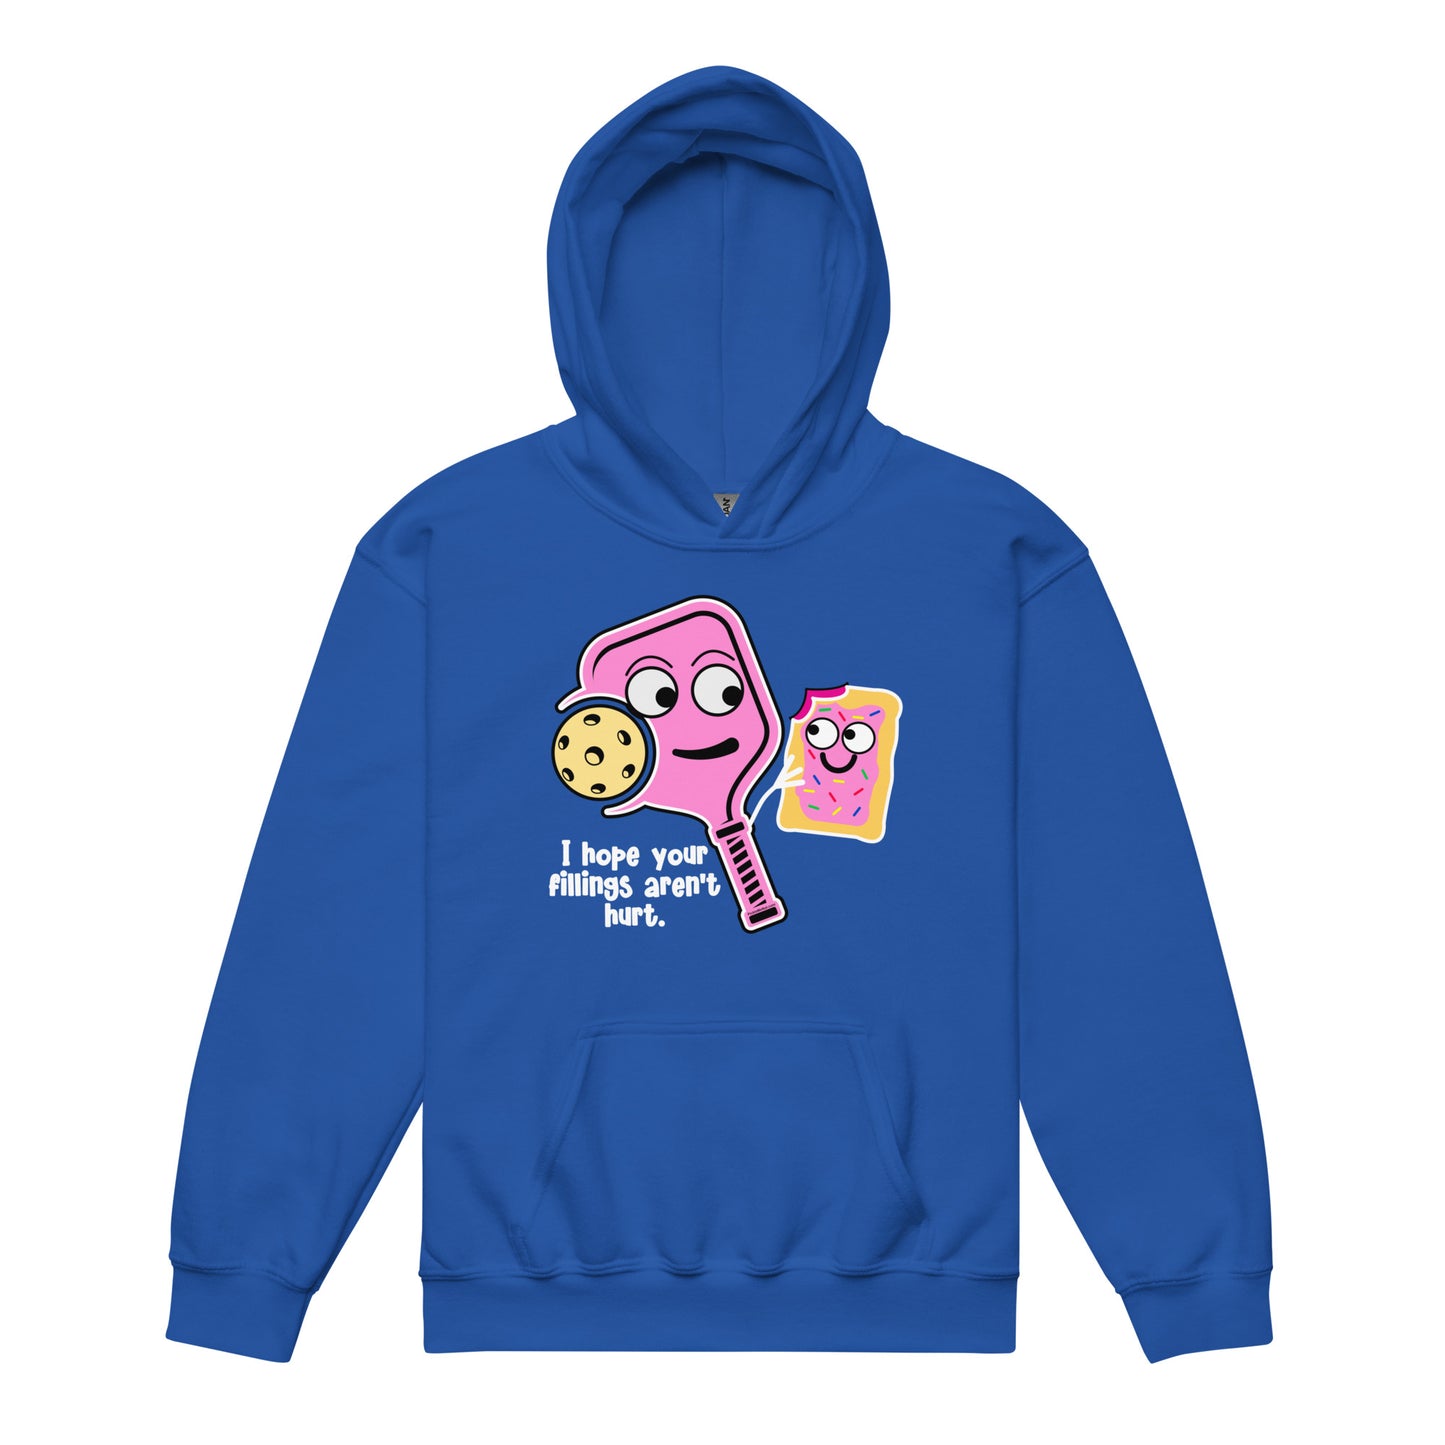 Fun Pickleball Pun: "I Hope Your Fillings Aren't Hurt" Youth Heavy Blend Hoodie